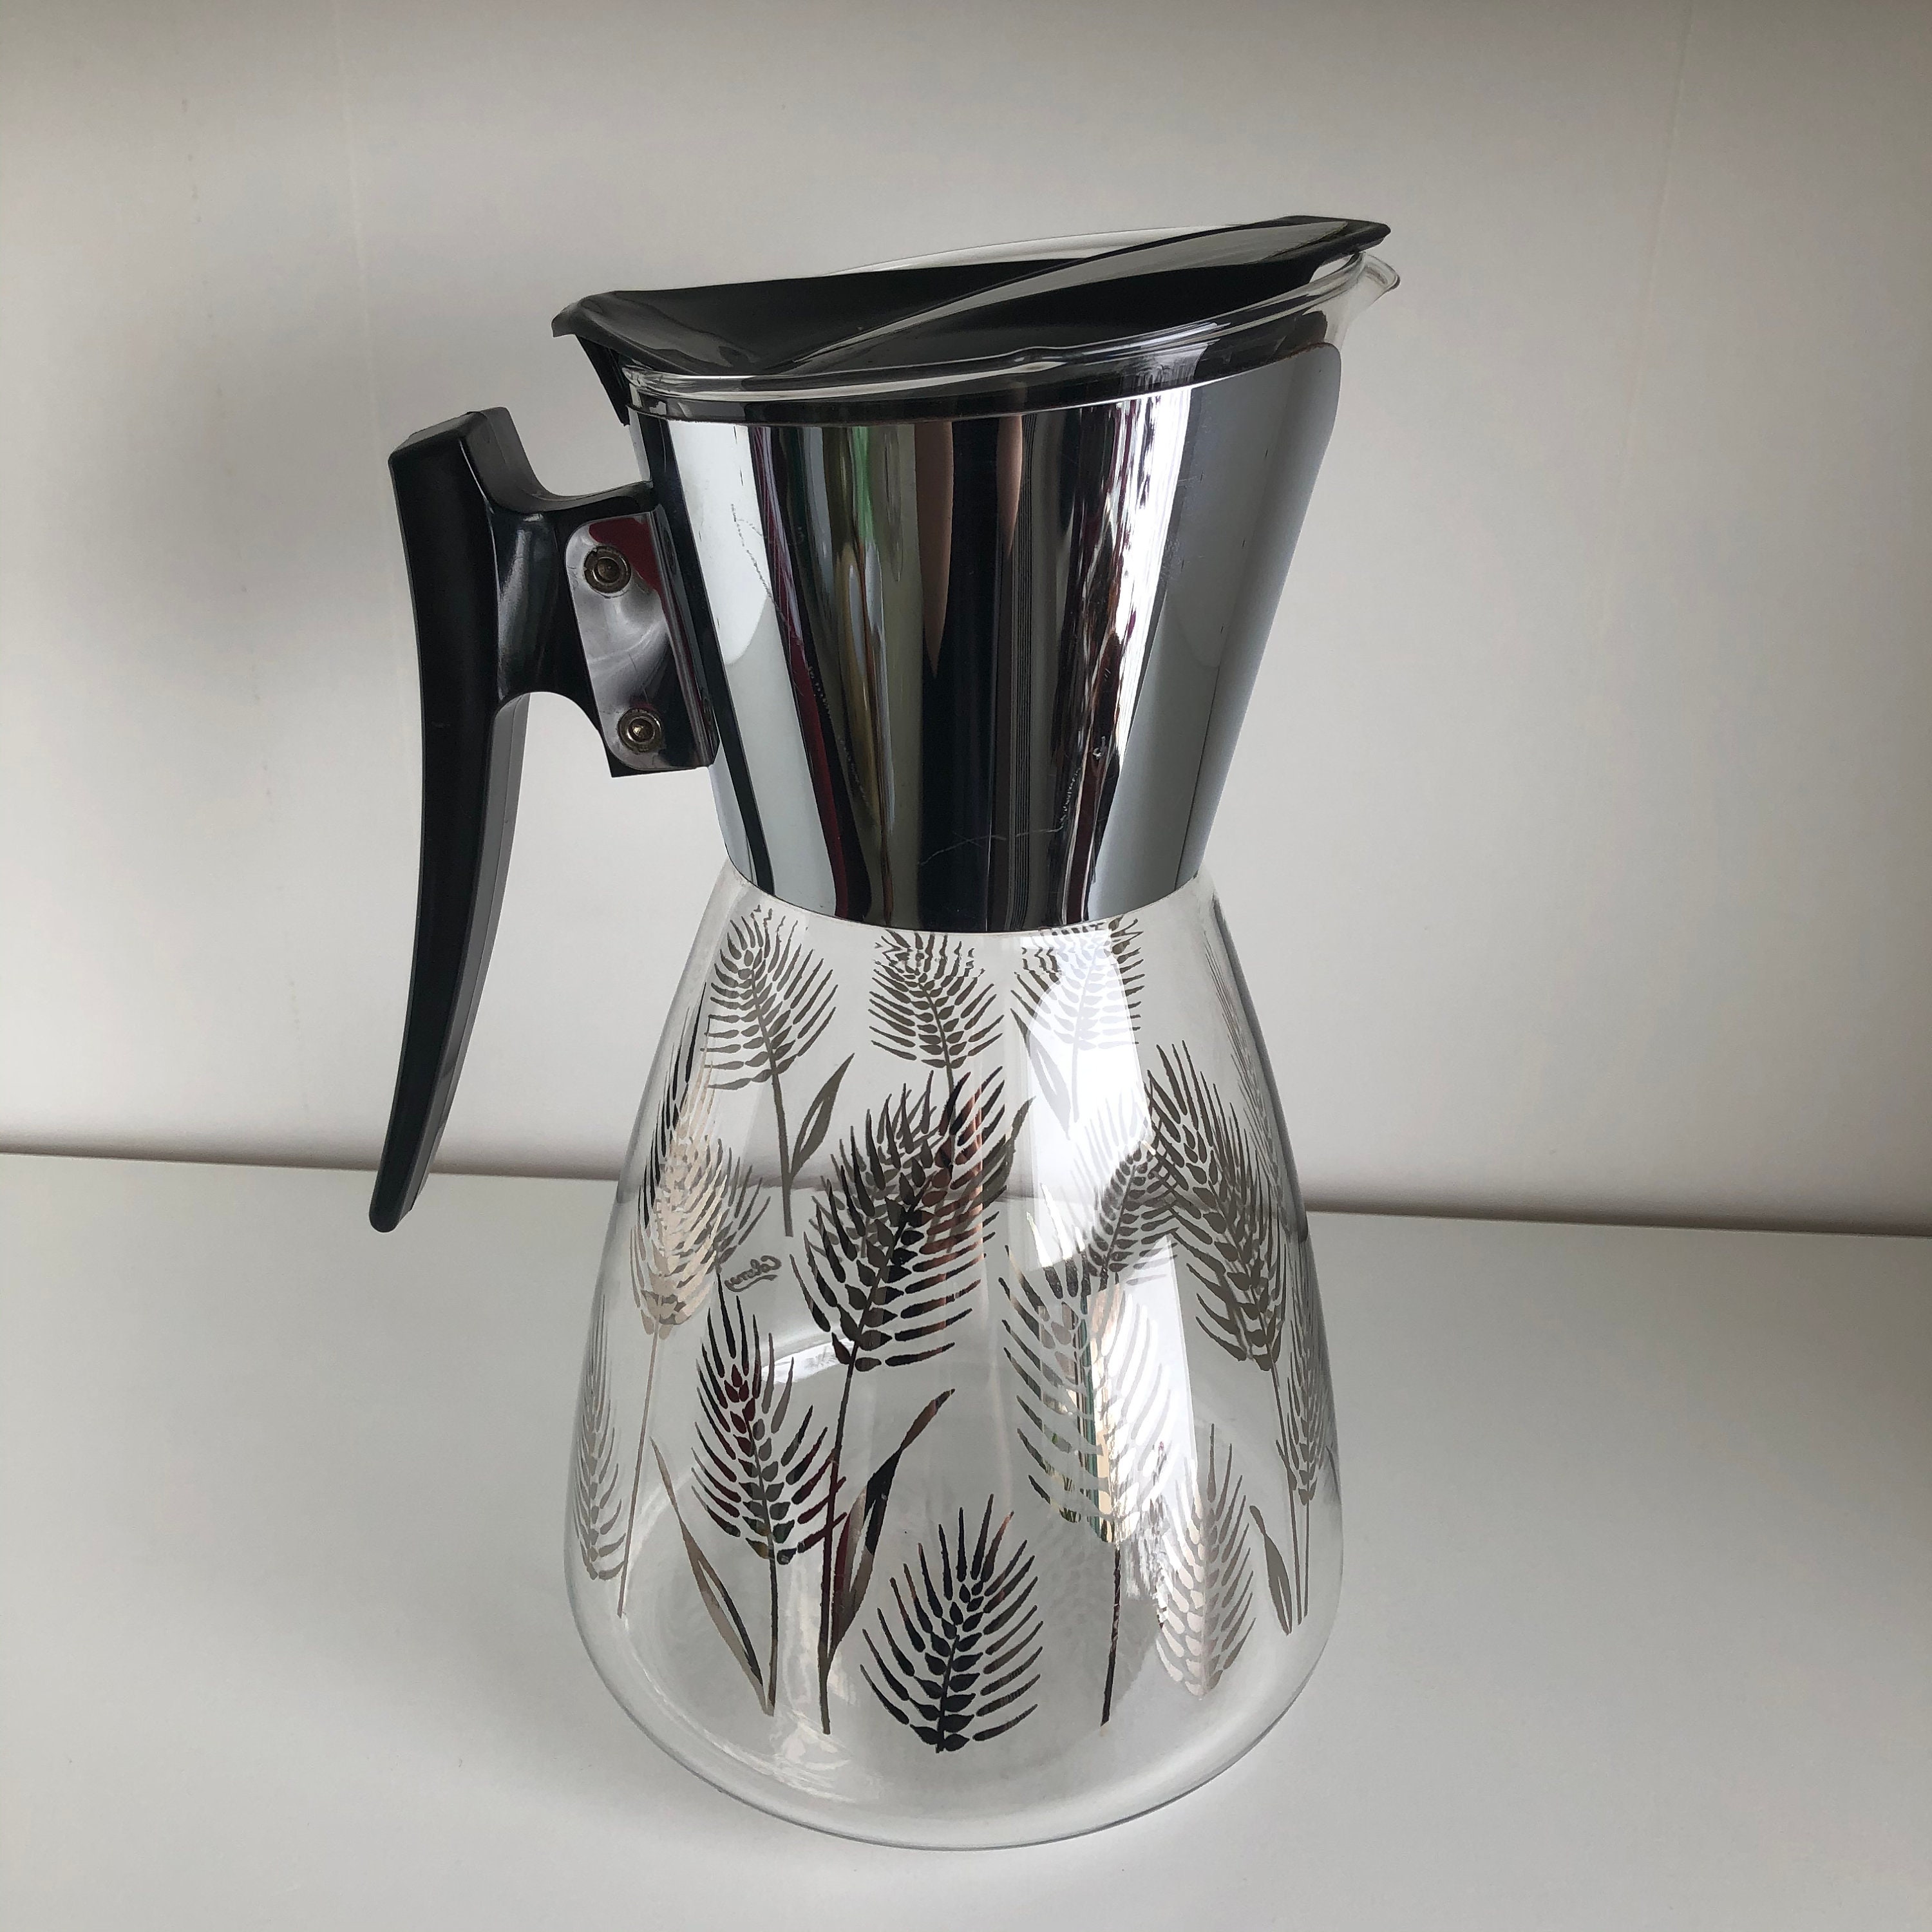 Colony Serv-master 12 Cup Coffee Carafe Silver Wheat MCM 